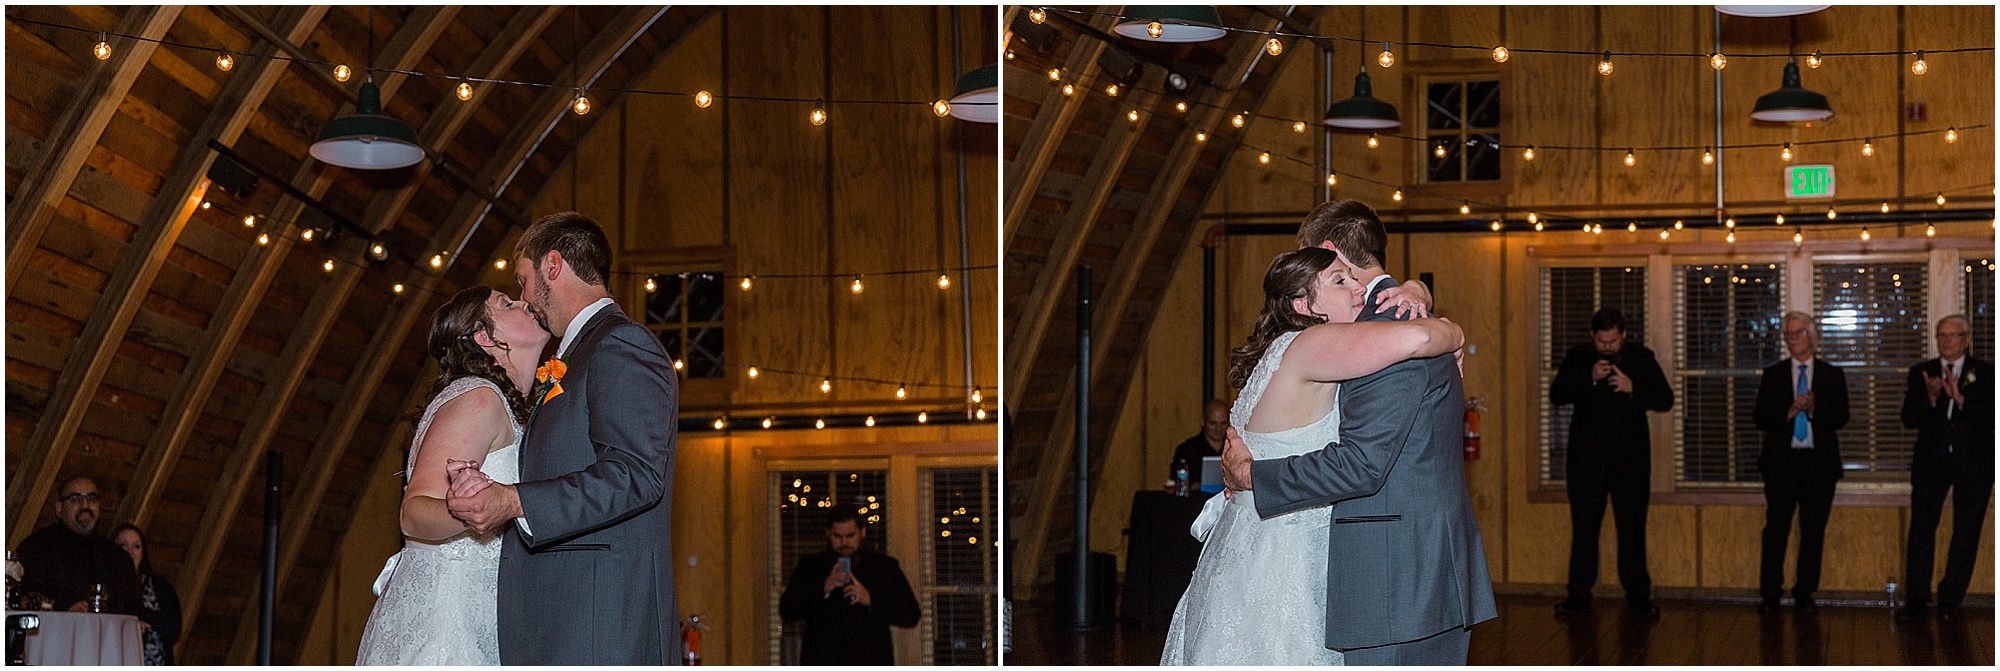 A newly married couple has their first dance upstairs in the gorgeous hardwood interior of Hollinshead Barn in Bend, OR. | Erica Swantek Photography